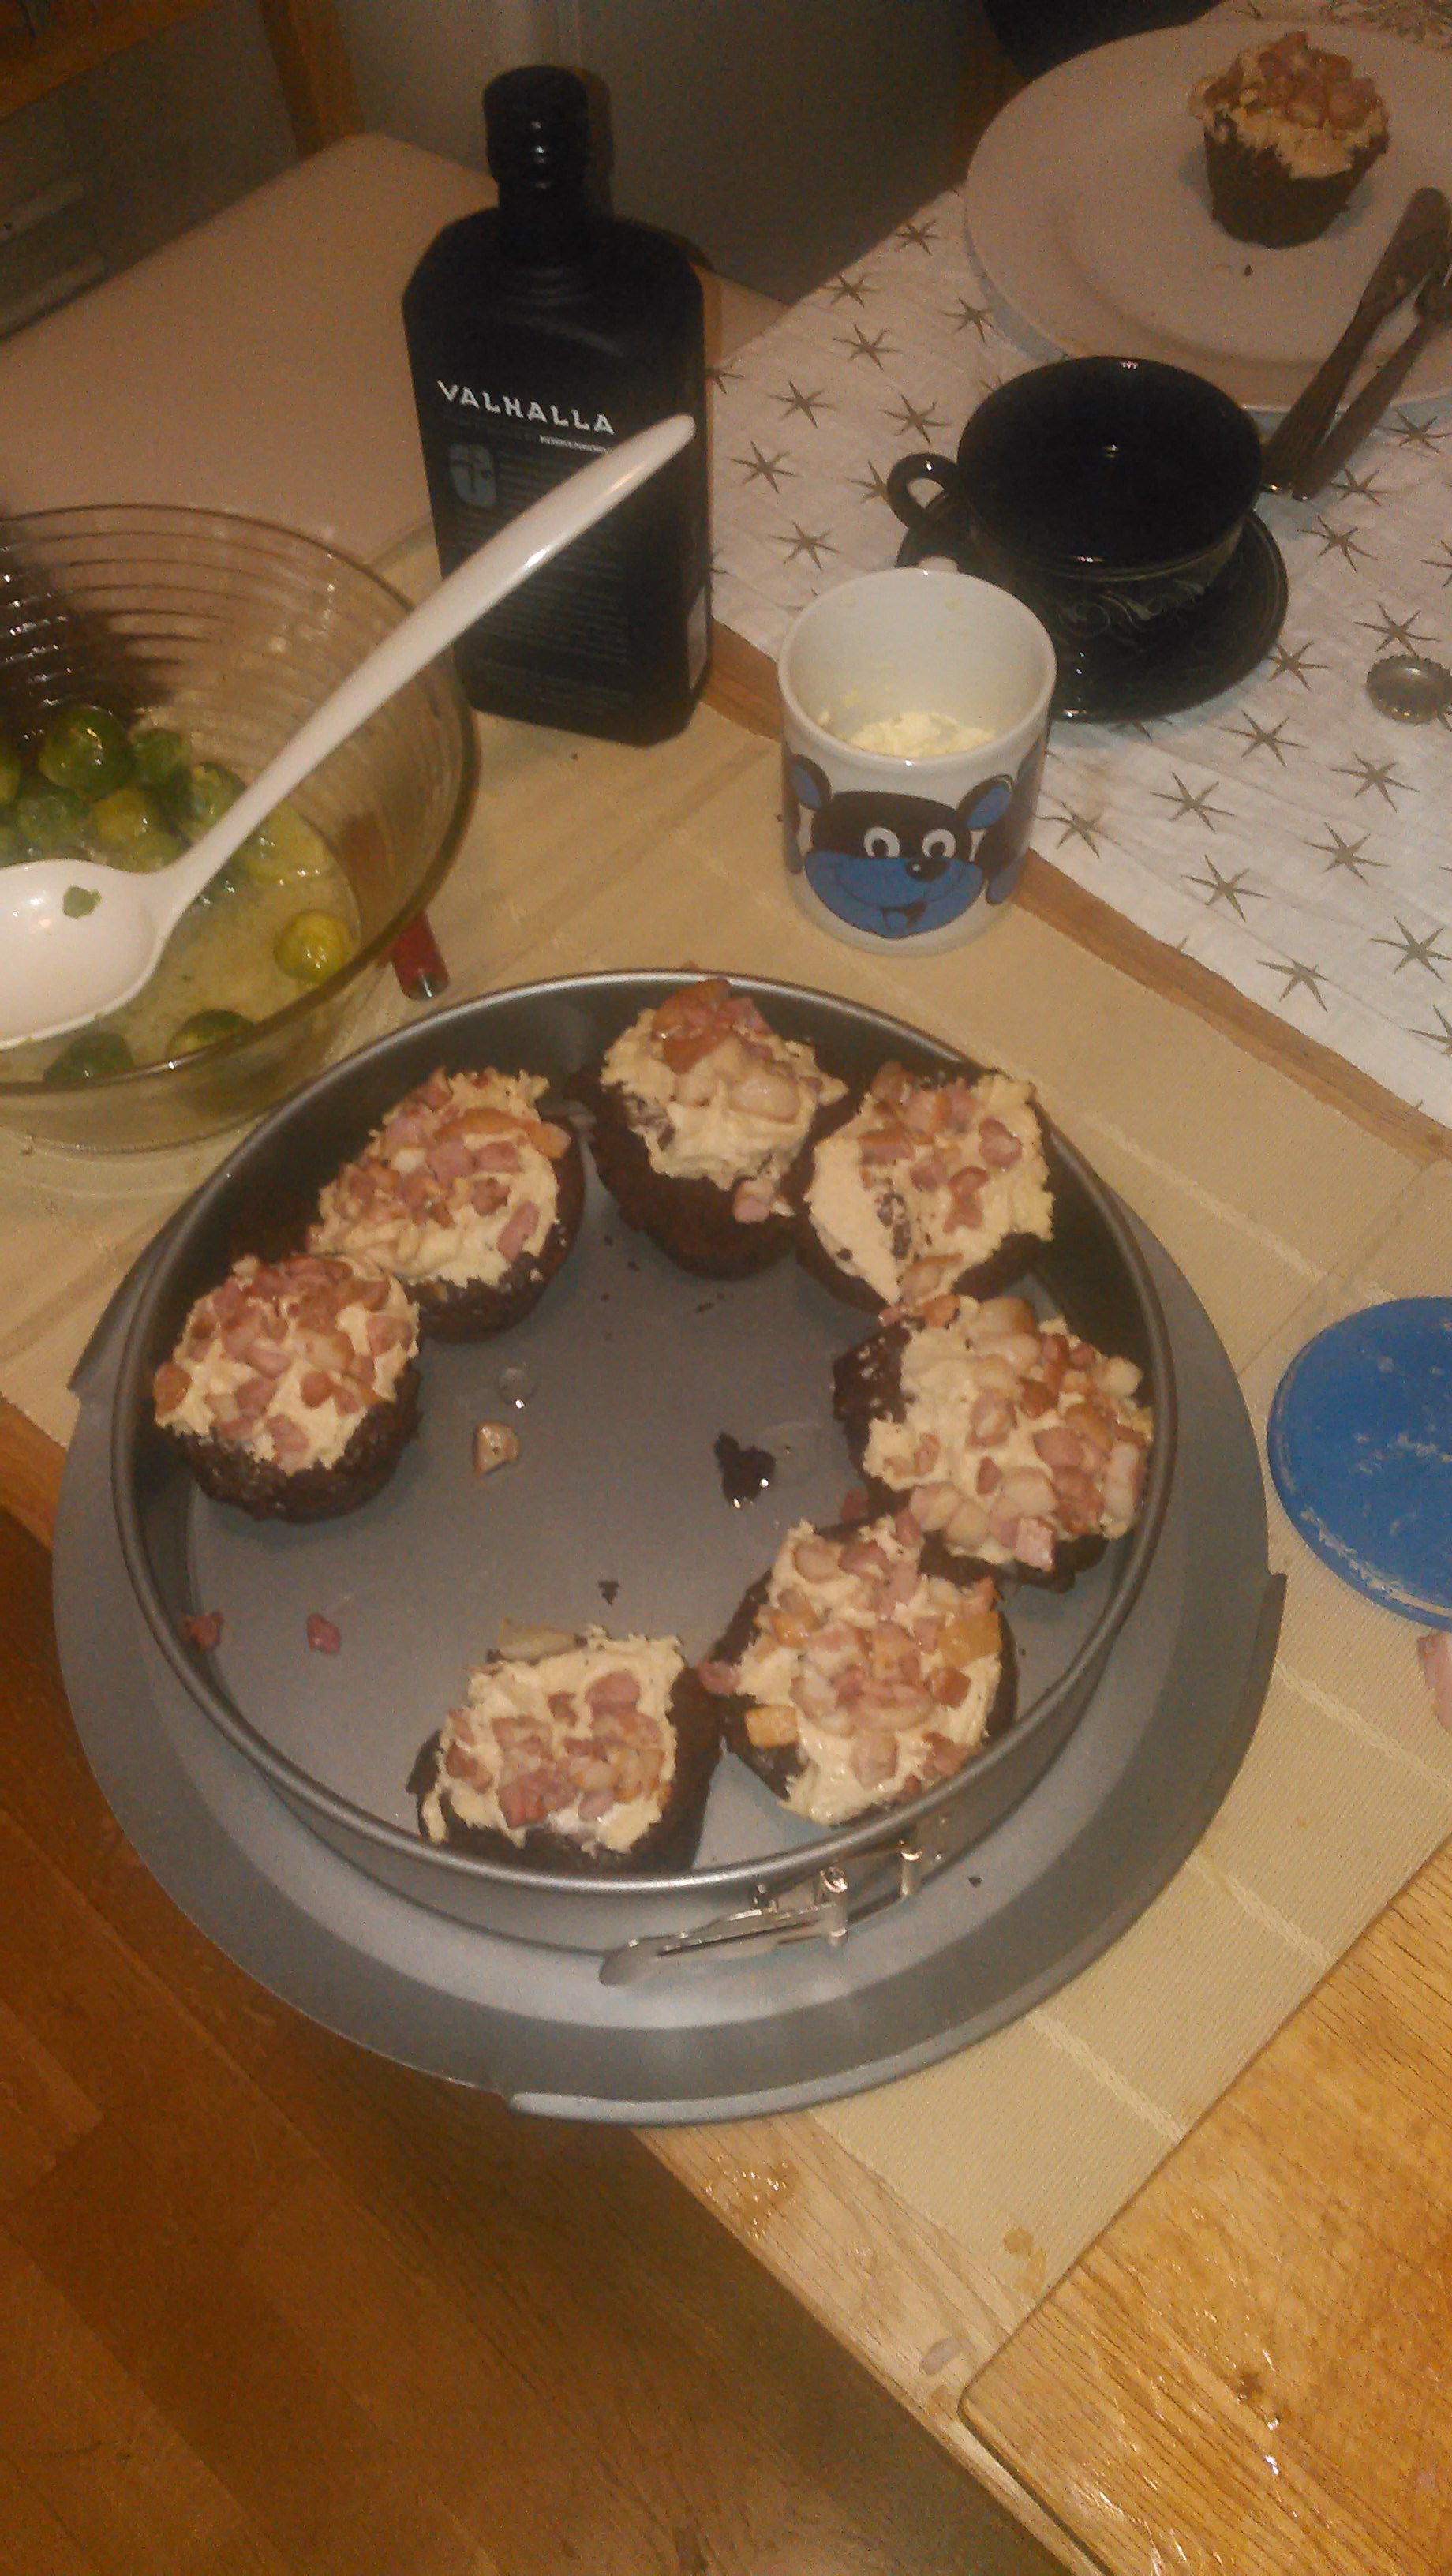 Bacon chocolate cupcakes with maple sirup and bacon topping